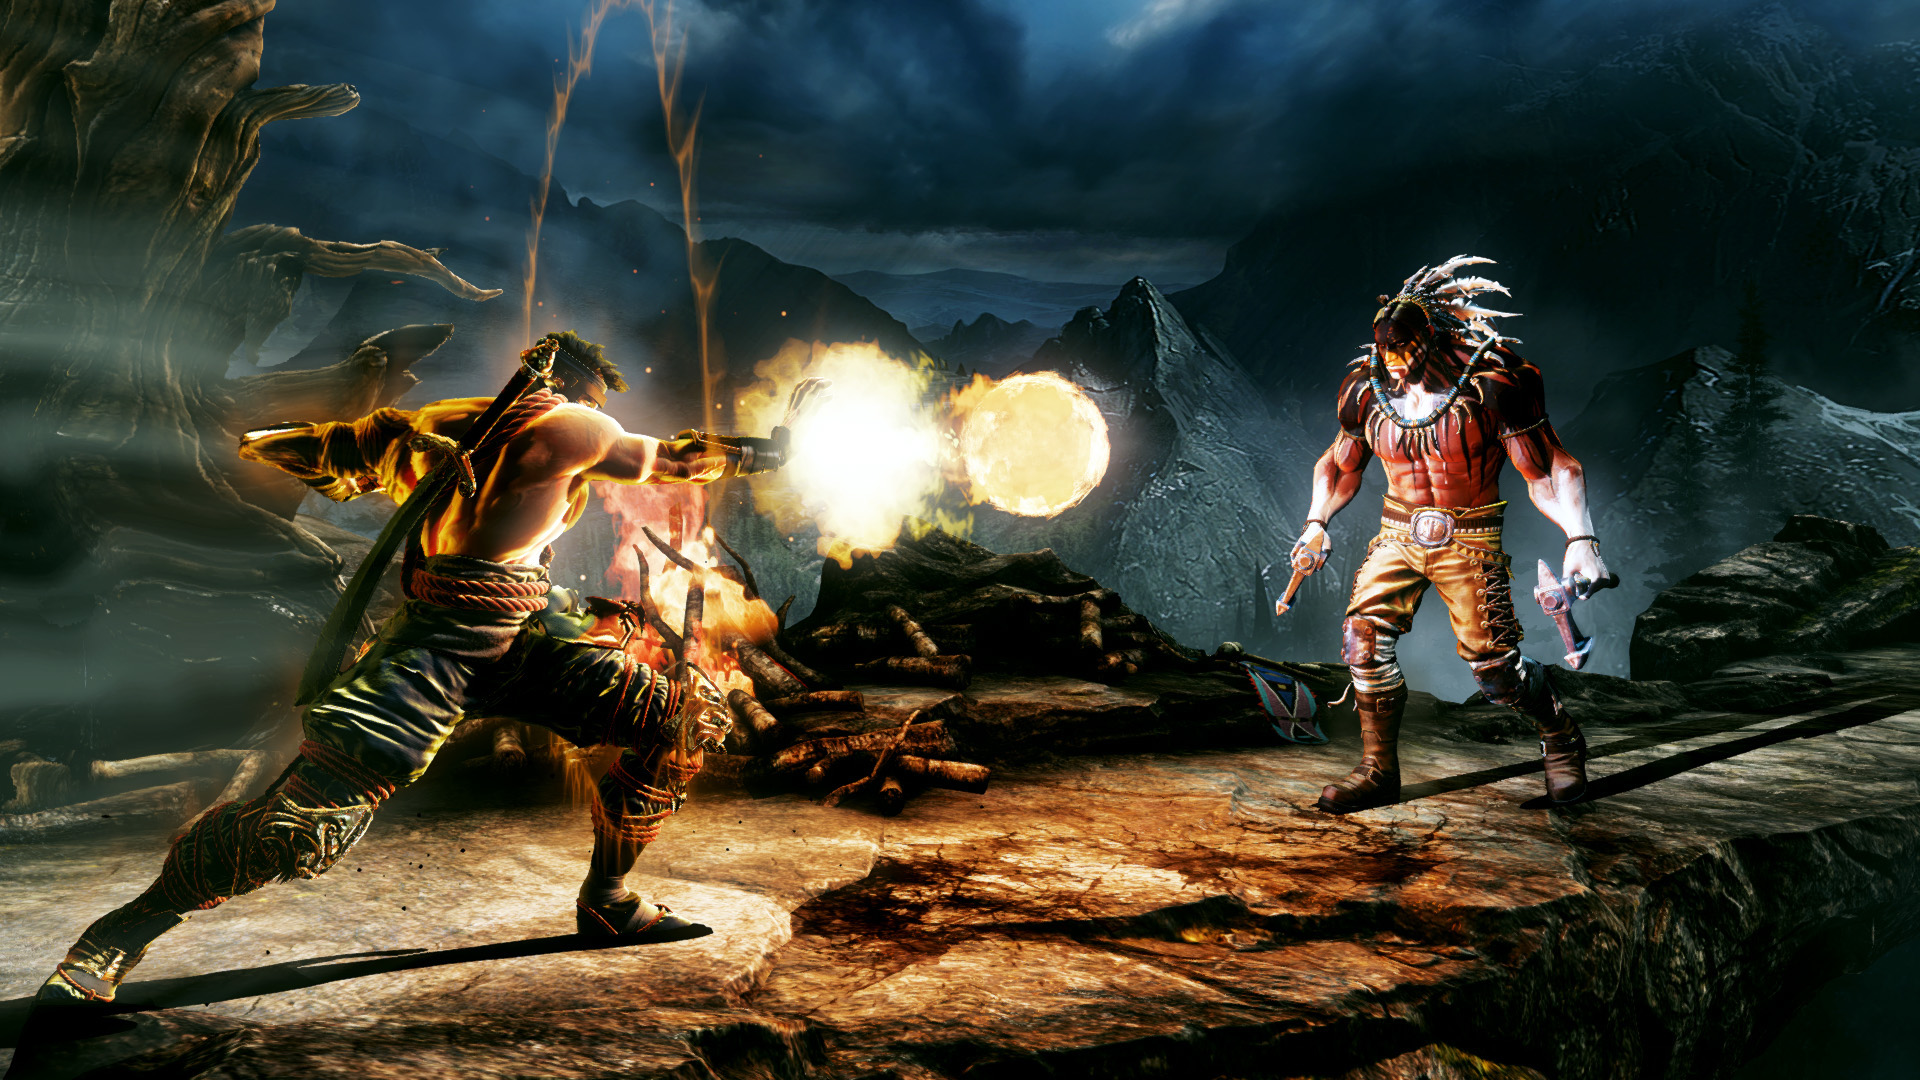 Best fighting games: A topless fighter fires a fireball towards a native indian character with two axes